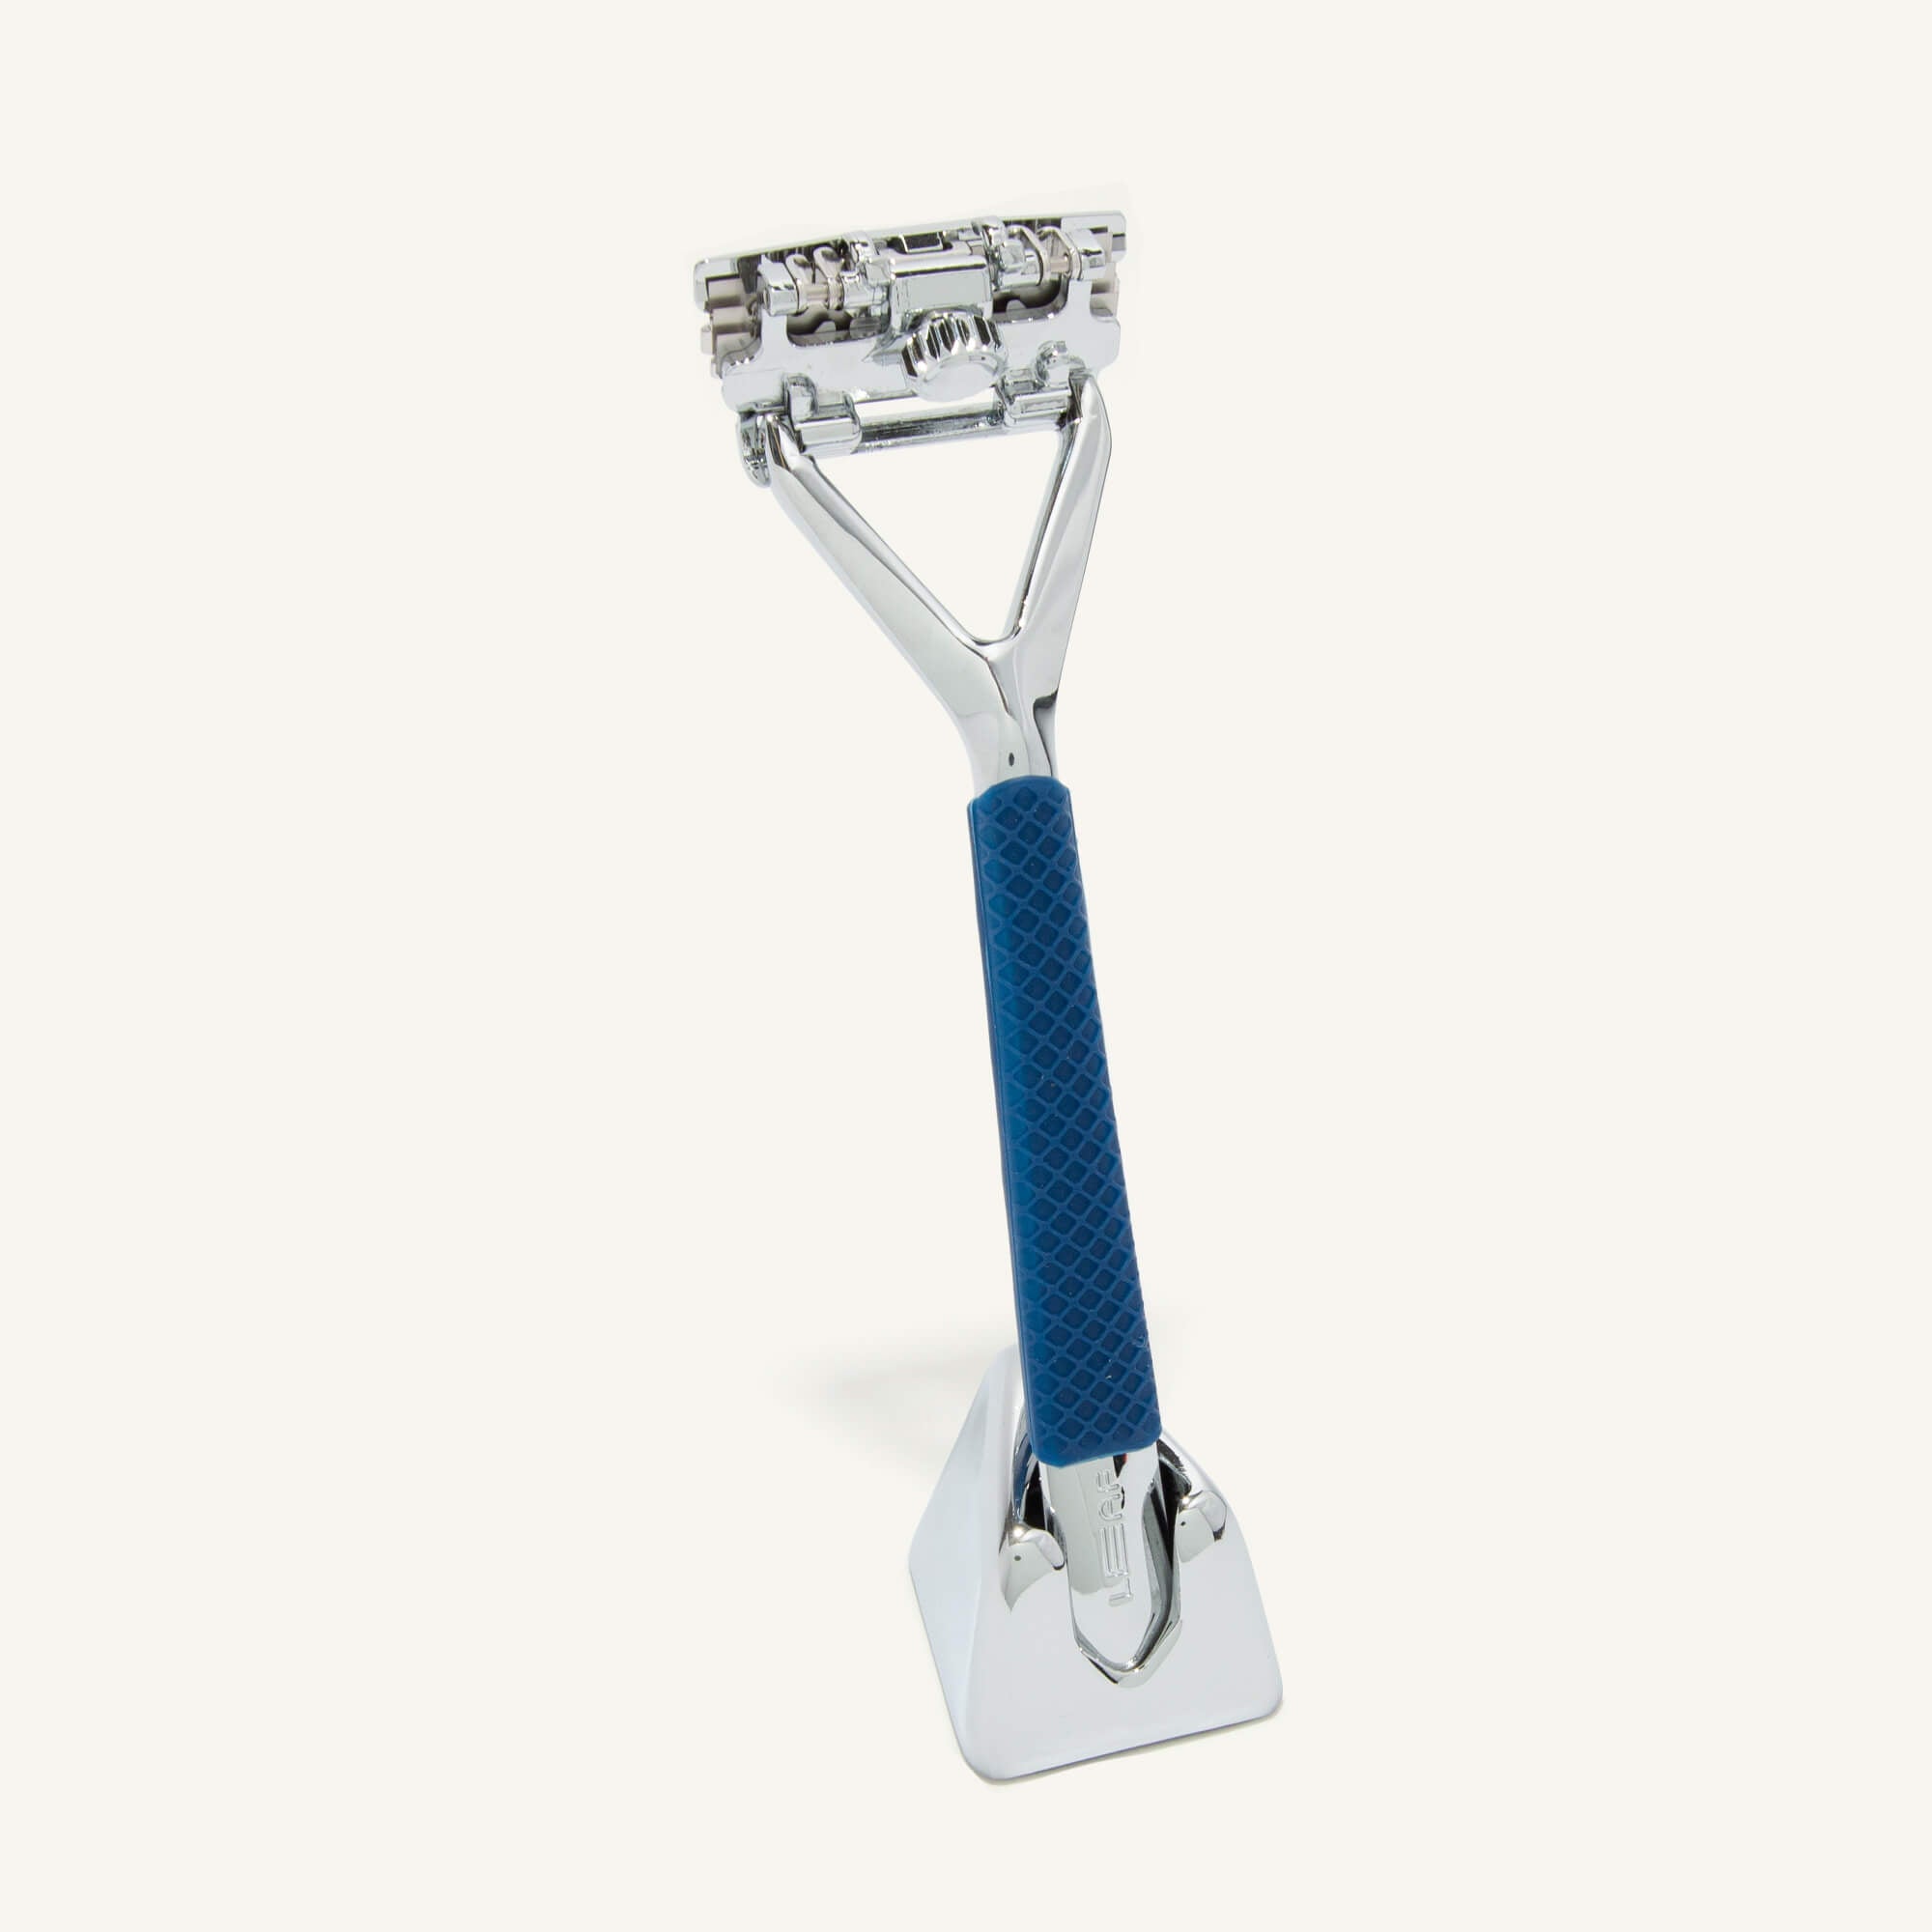 Chrome Leaf razor and stand, with a Blue grip sleeve on it.